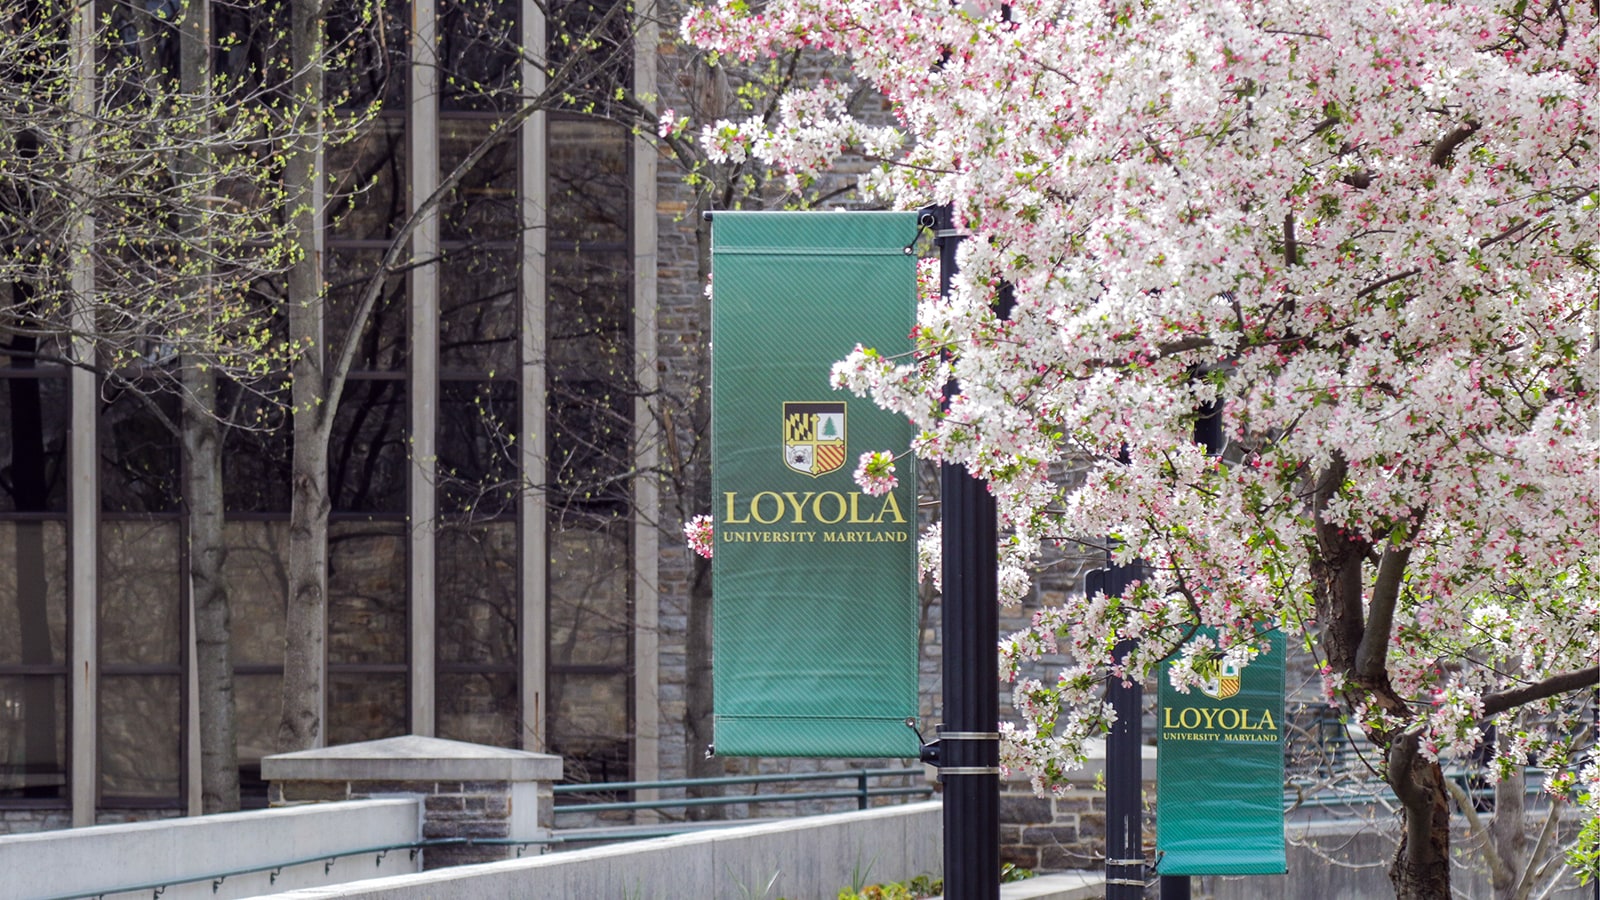 A green Loyola banner hangs off a lamp post with a tree with pink and white leaves in front of it